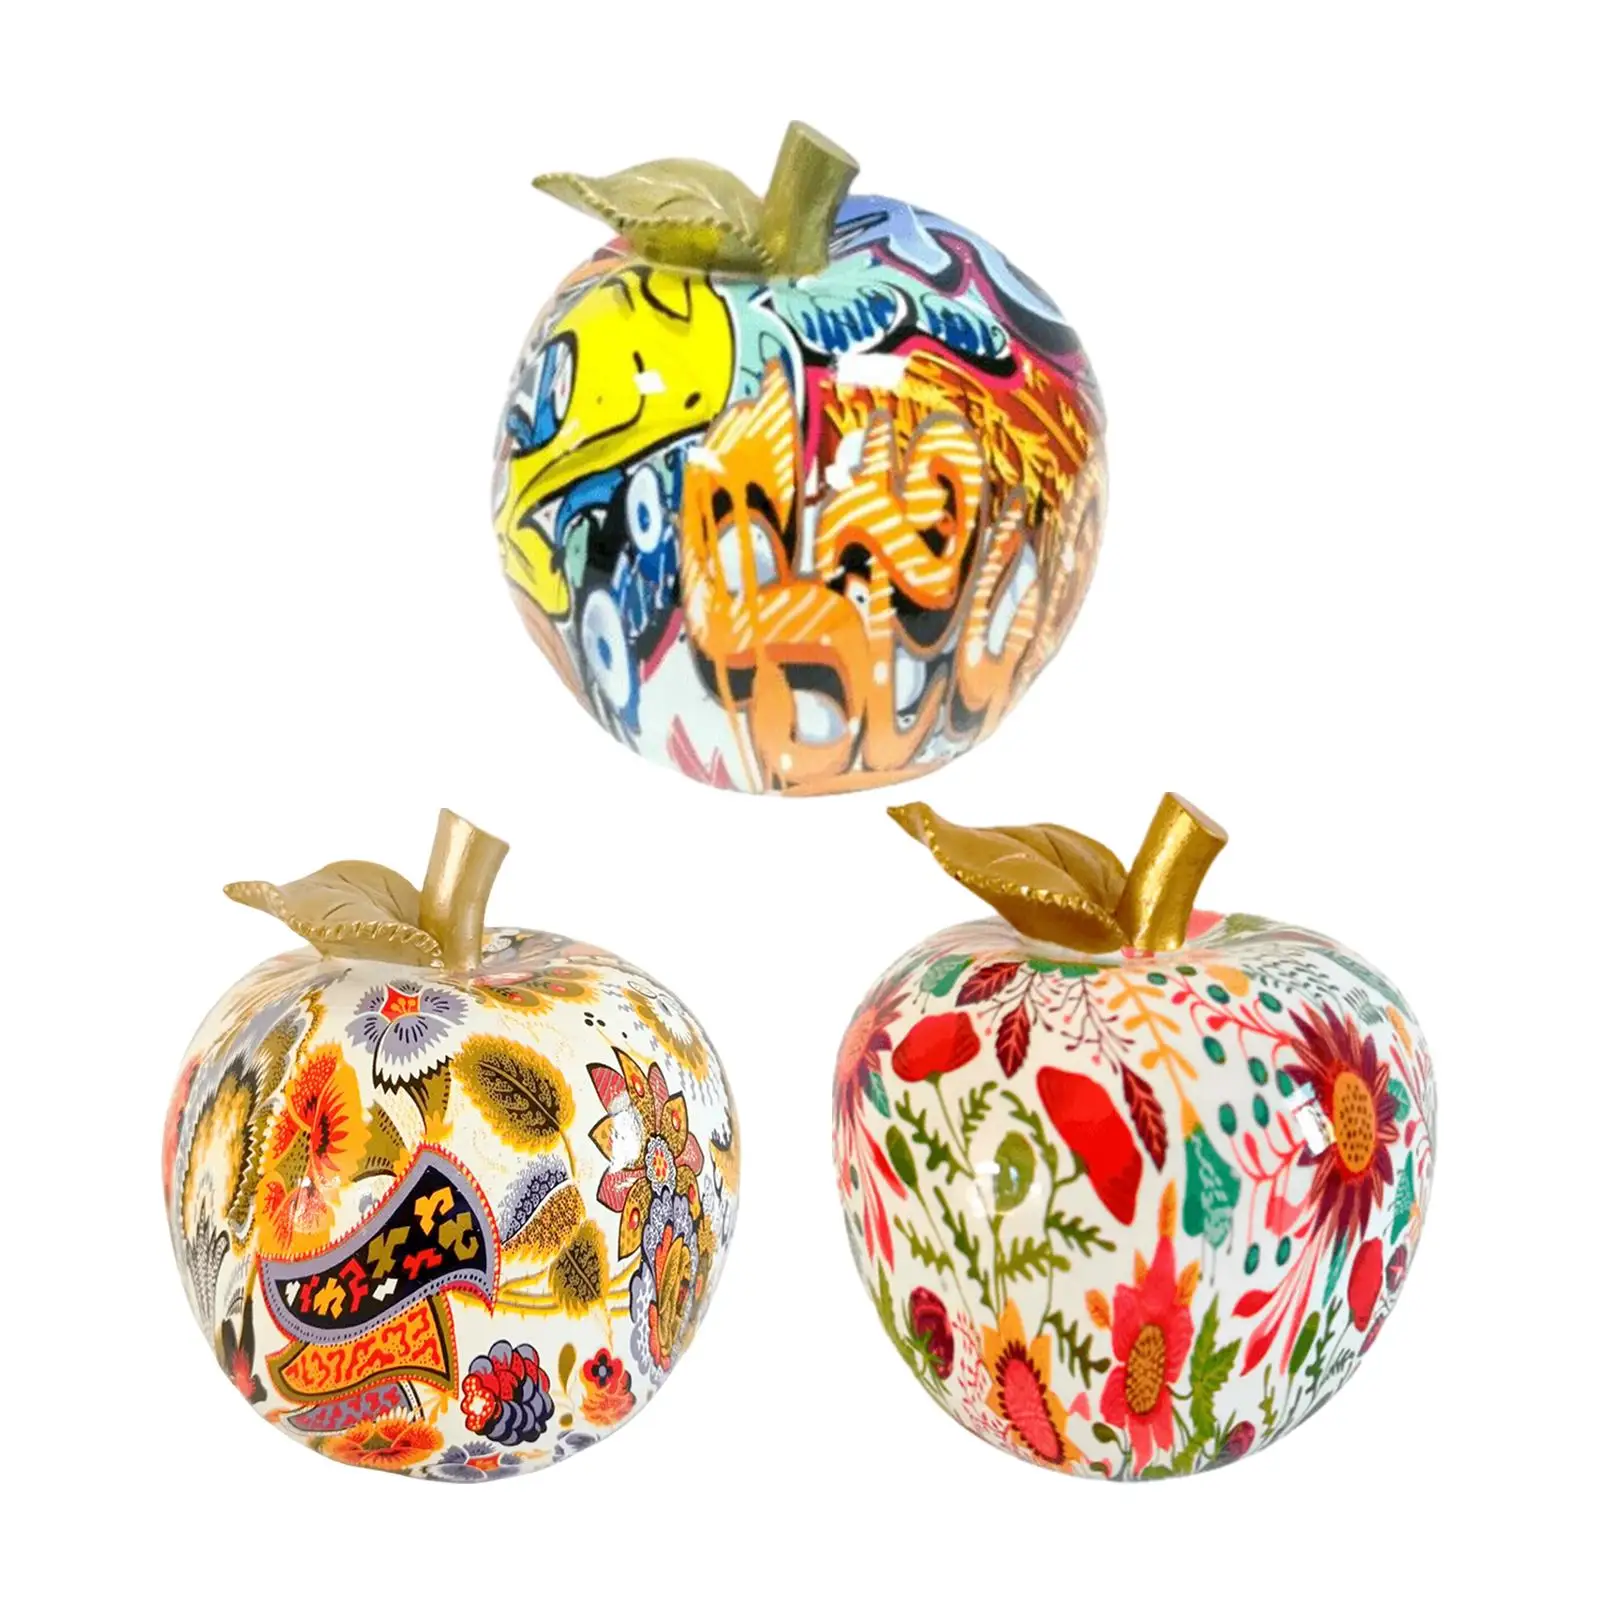 Graffiti Apple Statues Home Decoration Collectible Simulation Fruits Sculpture for Wedding Birthday Bookshelf Entry